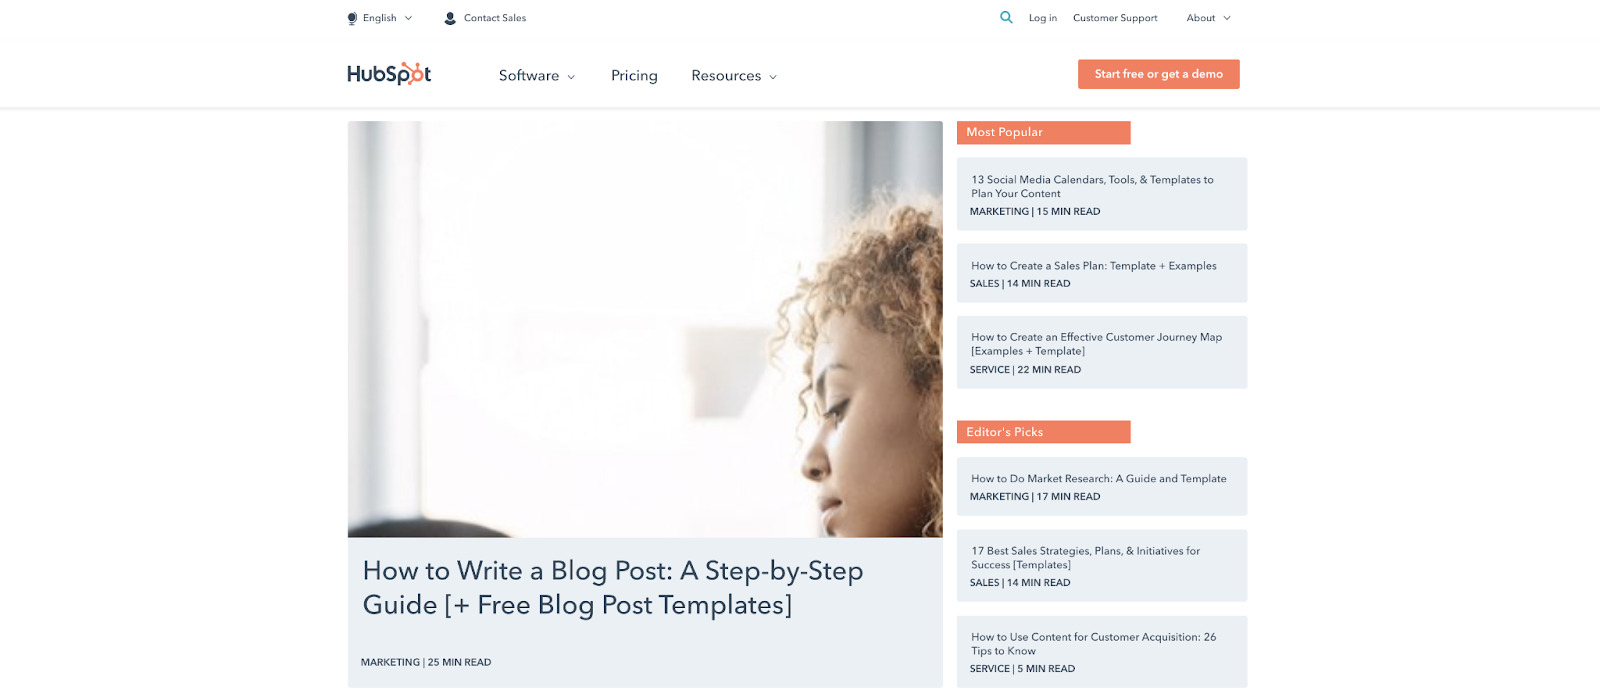 Hubspot uses a simple name for its blog